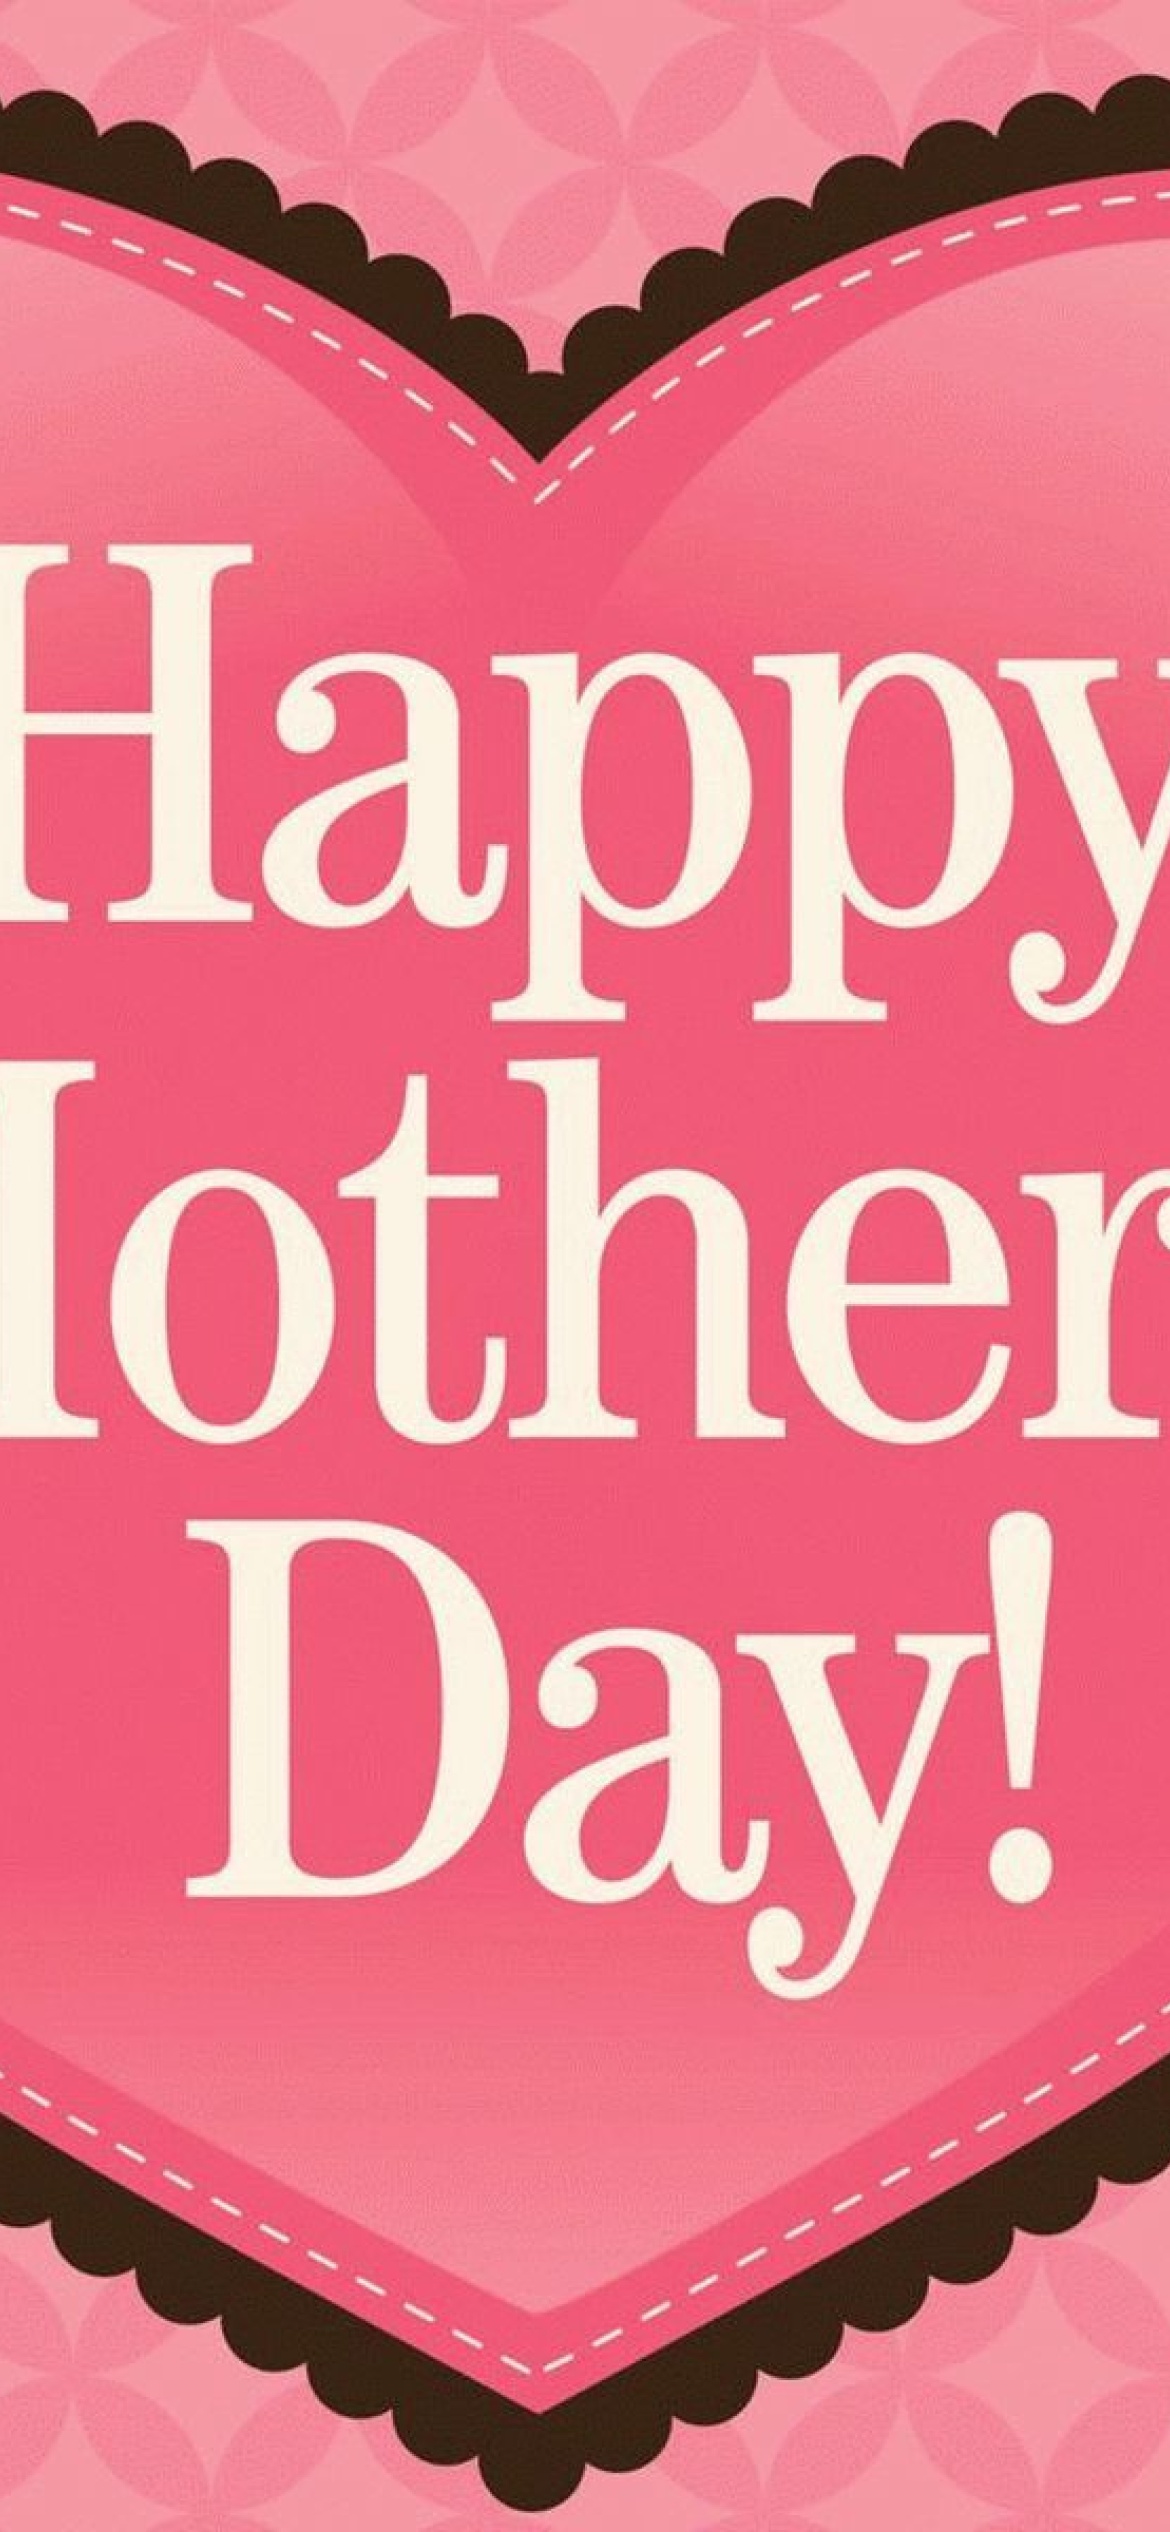 Happy Mother Day wallpaper 1170x2532